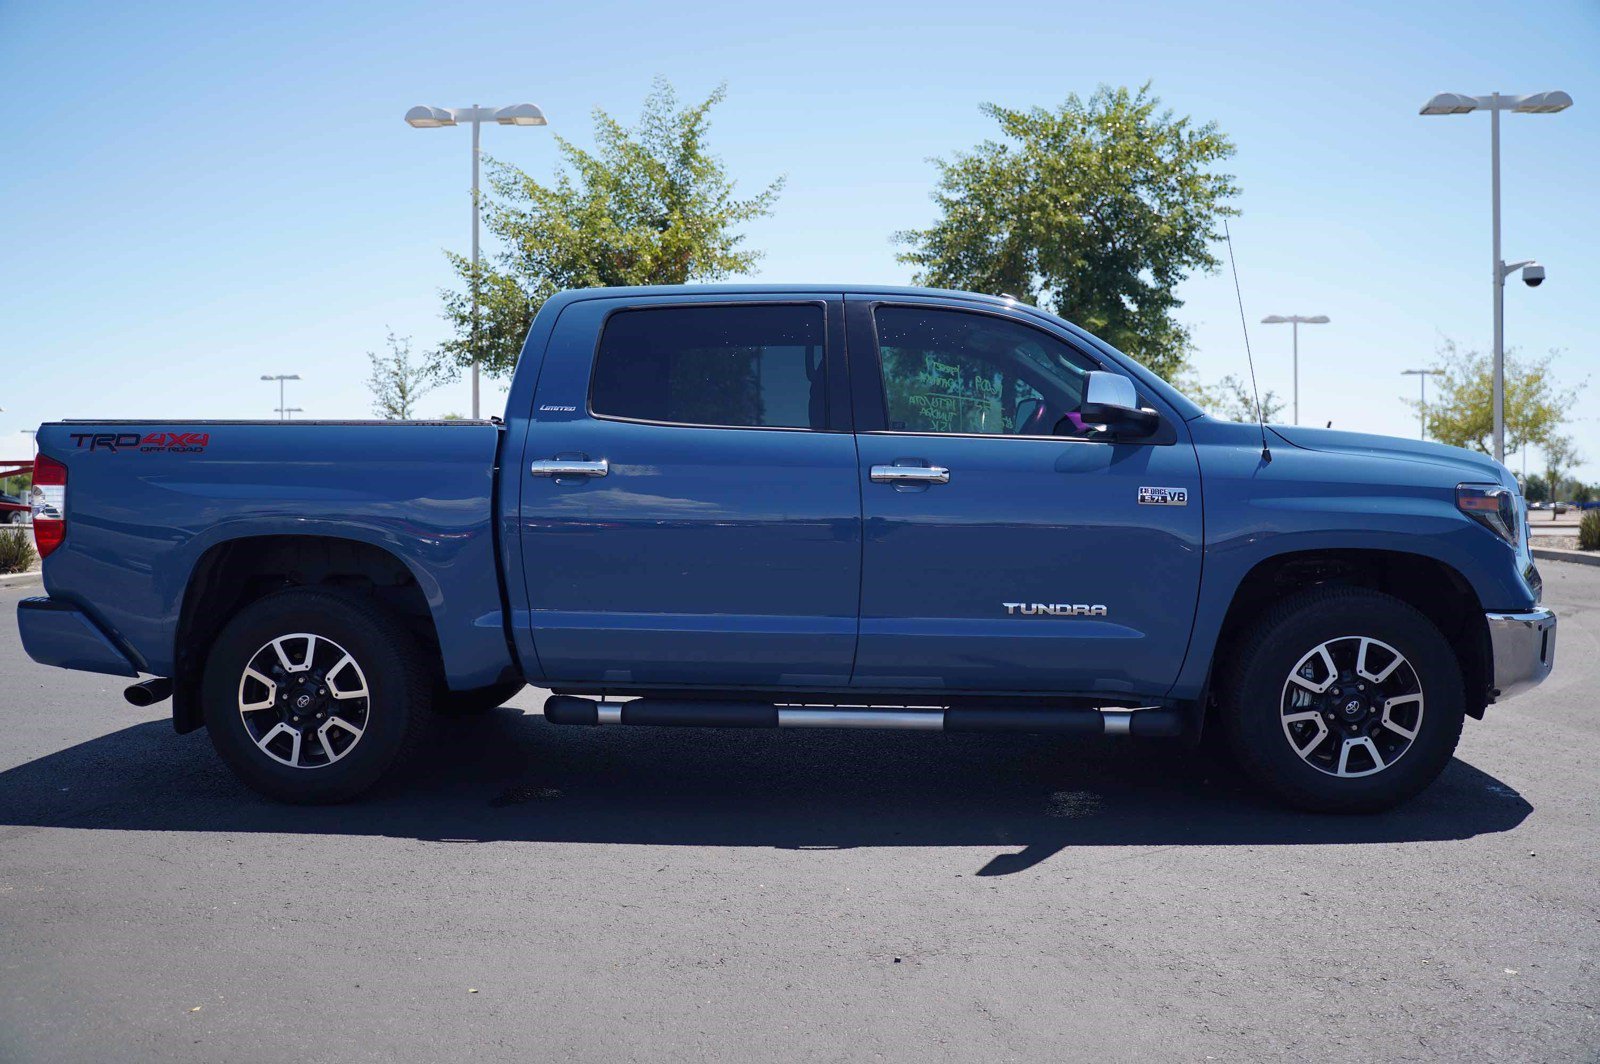 Certified Pre-Owned 2019 Toyota Tundra 4WD Limited 4WD Crew Cab Pickup